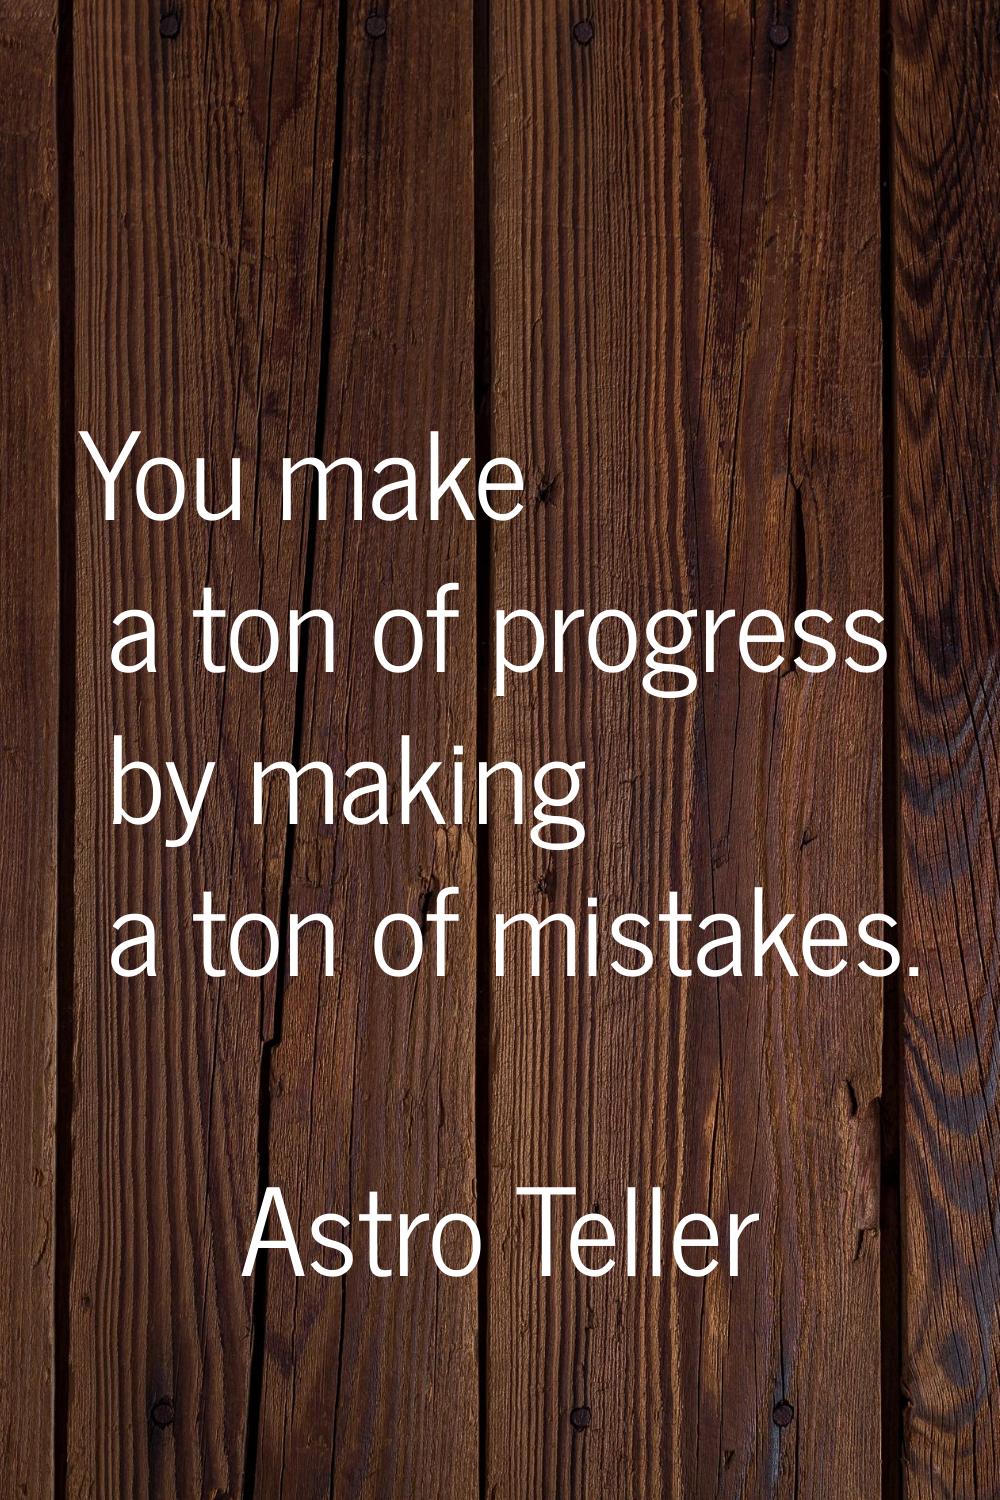 You make a ton of progress by making a ton of mistakes.